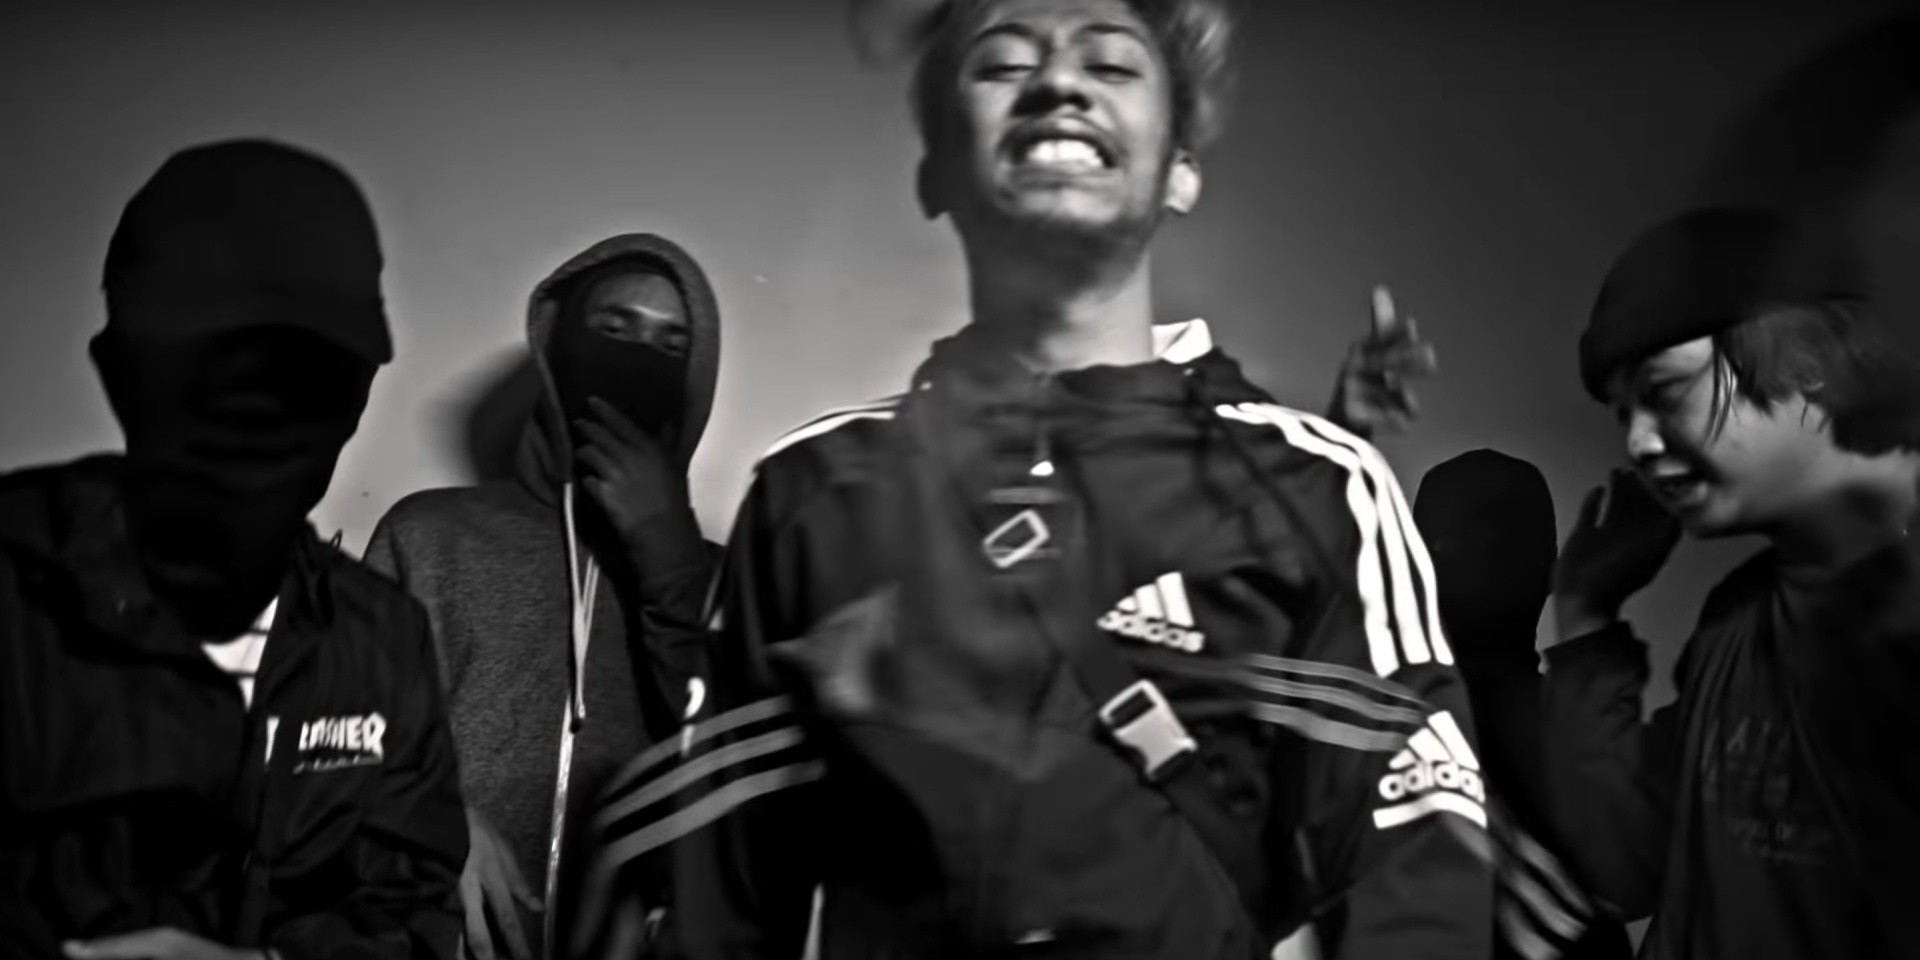 AE$OP CA$H shares fiery, aggressive music video for 'KILT' – watch